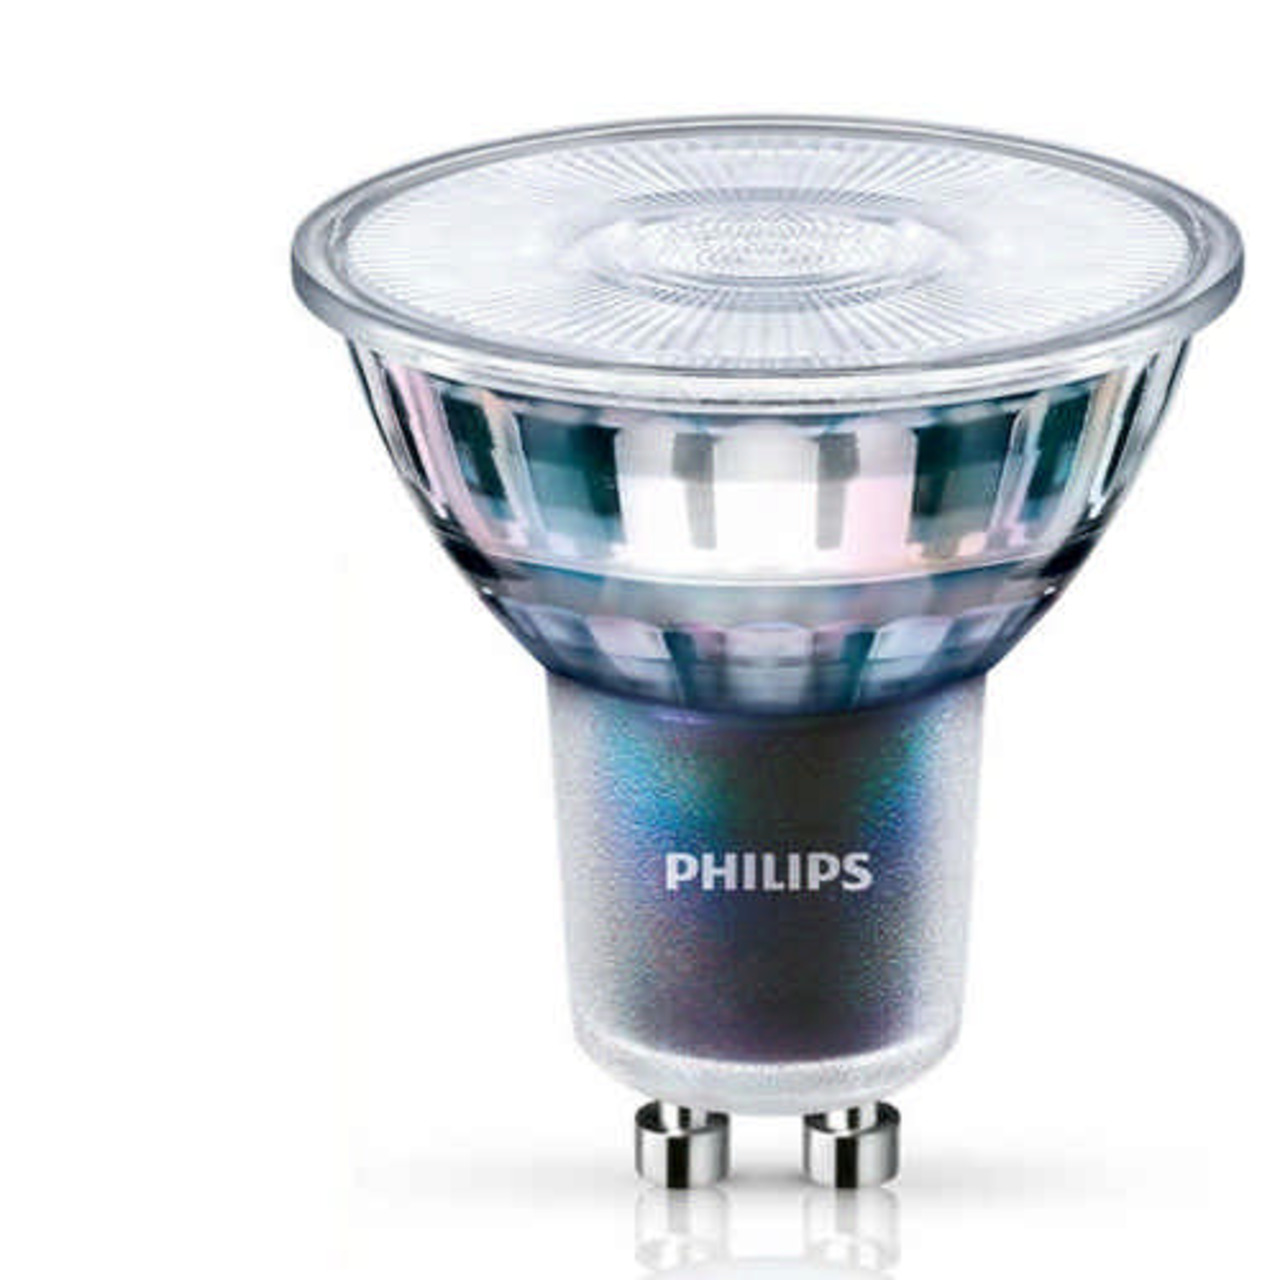 Philips MASTER ExpertColor 5-5-W-GU10-LED-Lampe- 375 lm- 97 Ra- 36- 3000K- warmweiss- dimmbar unter Beleuchtung